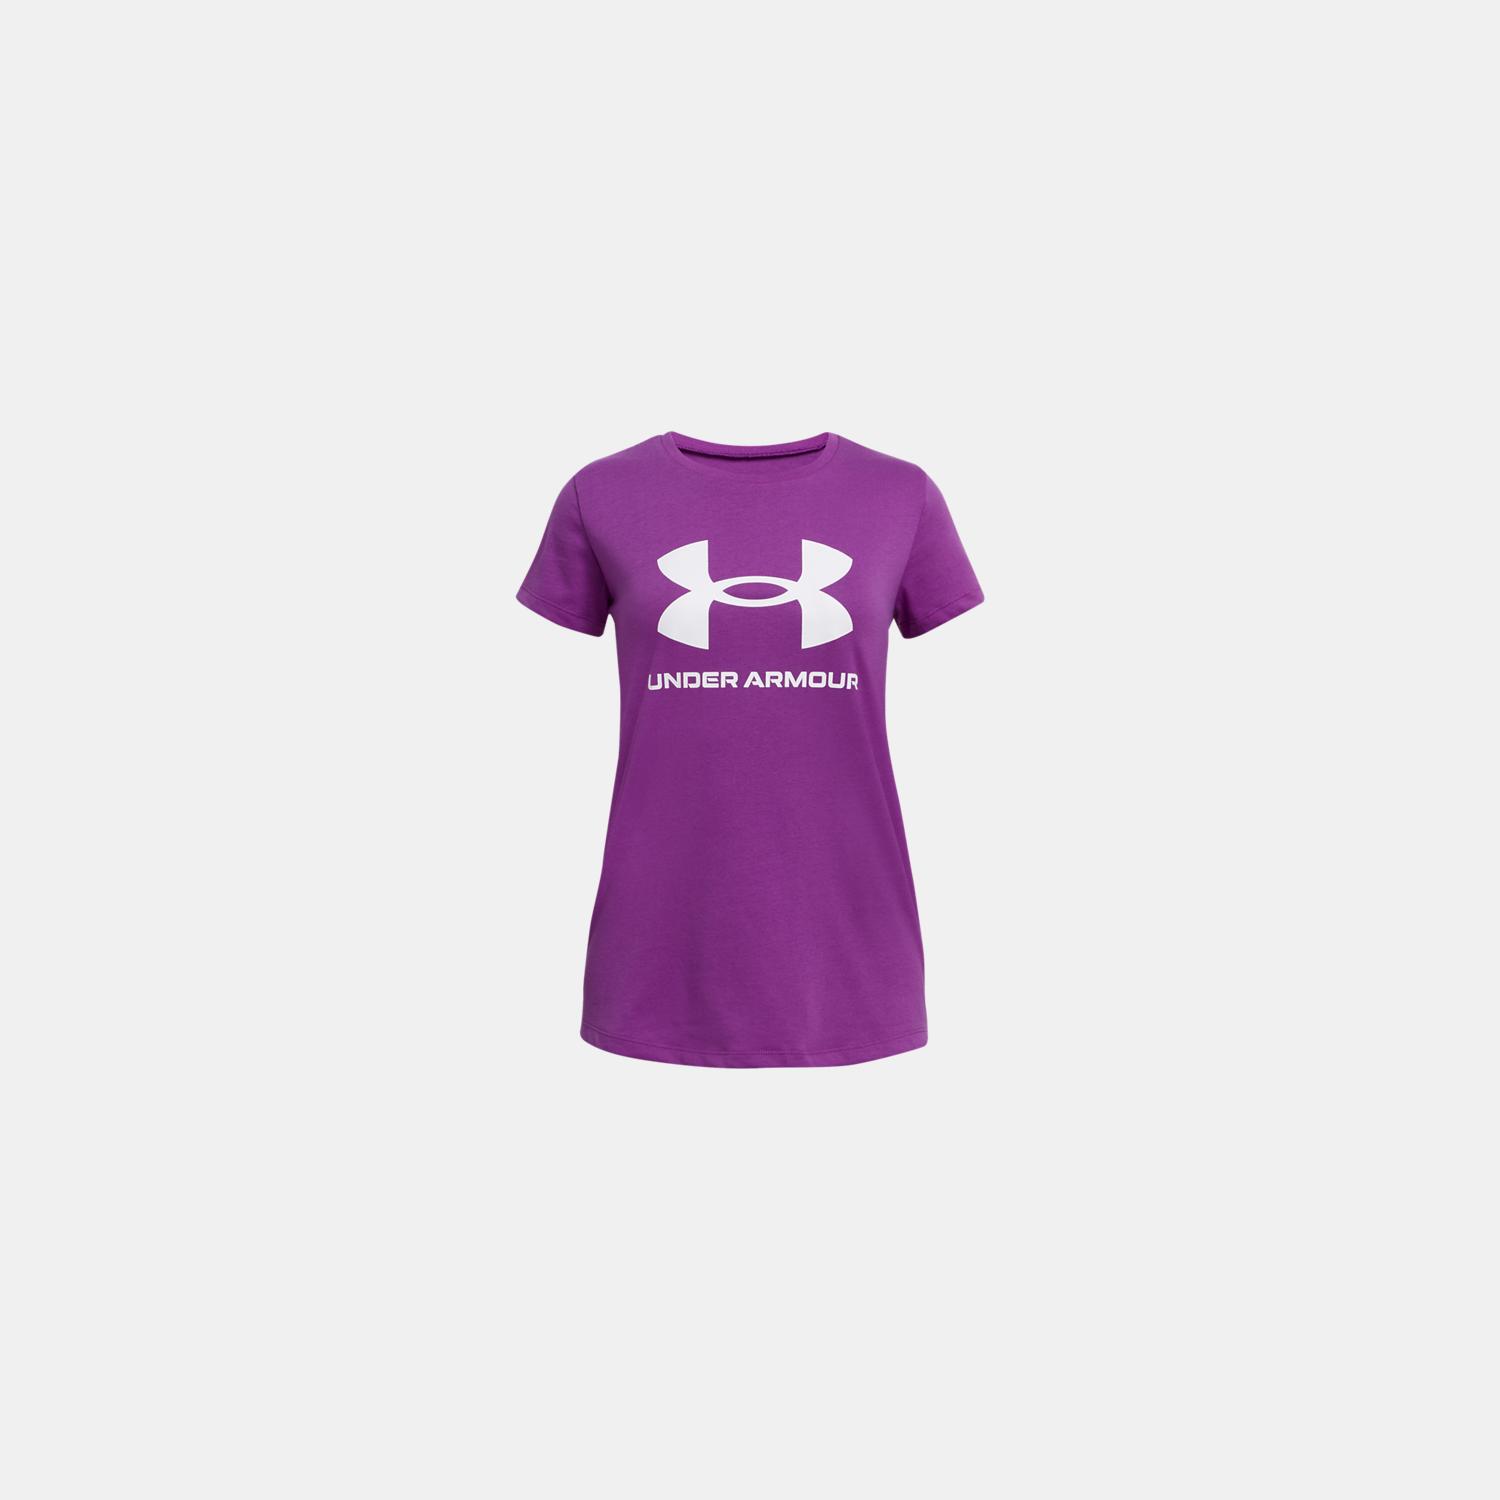 Under Armour Extra 50% Off Outlet Select Apparel + Free Shipping with code